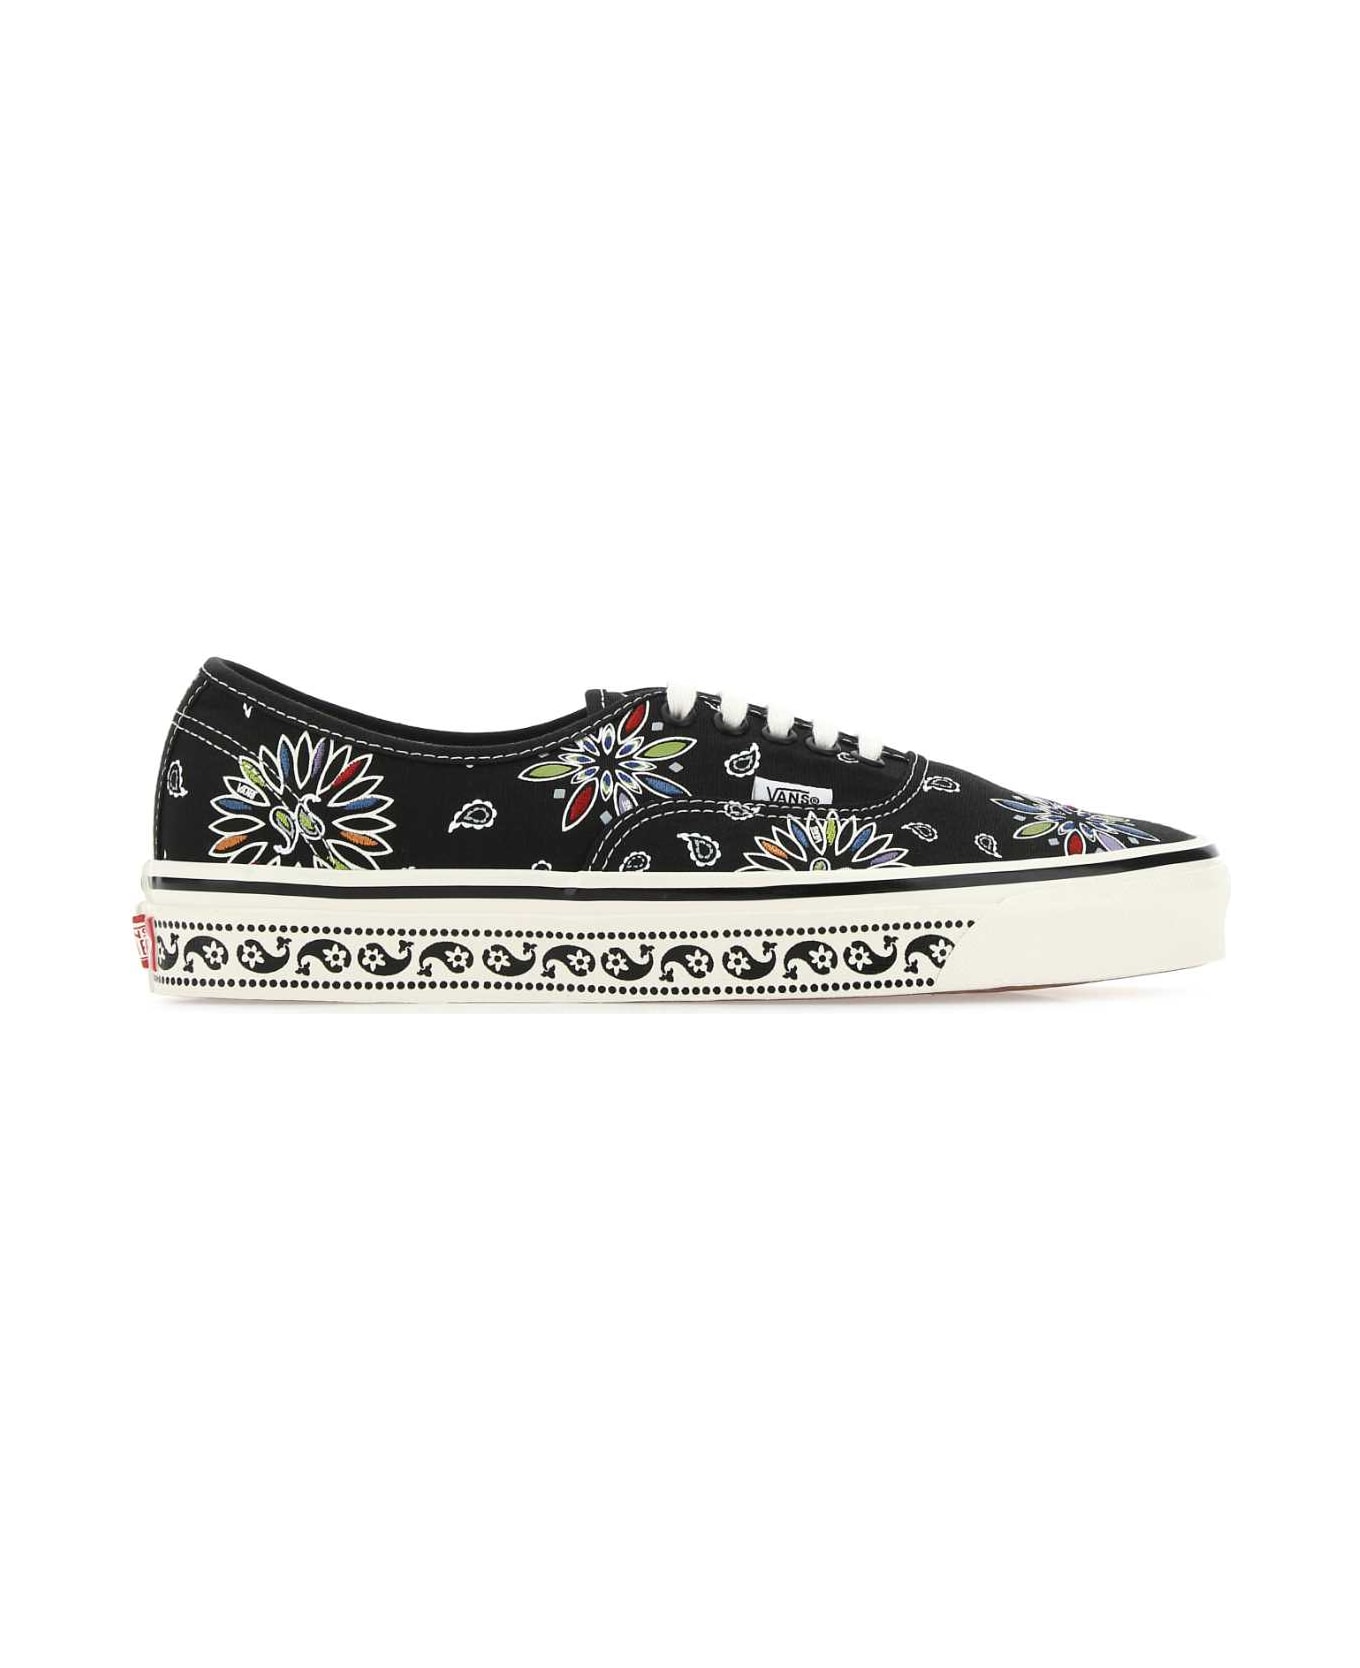 Vans Printed Canvas Anaheim Factory Authentic 44 Sneakers - 9GG1 スニーカー